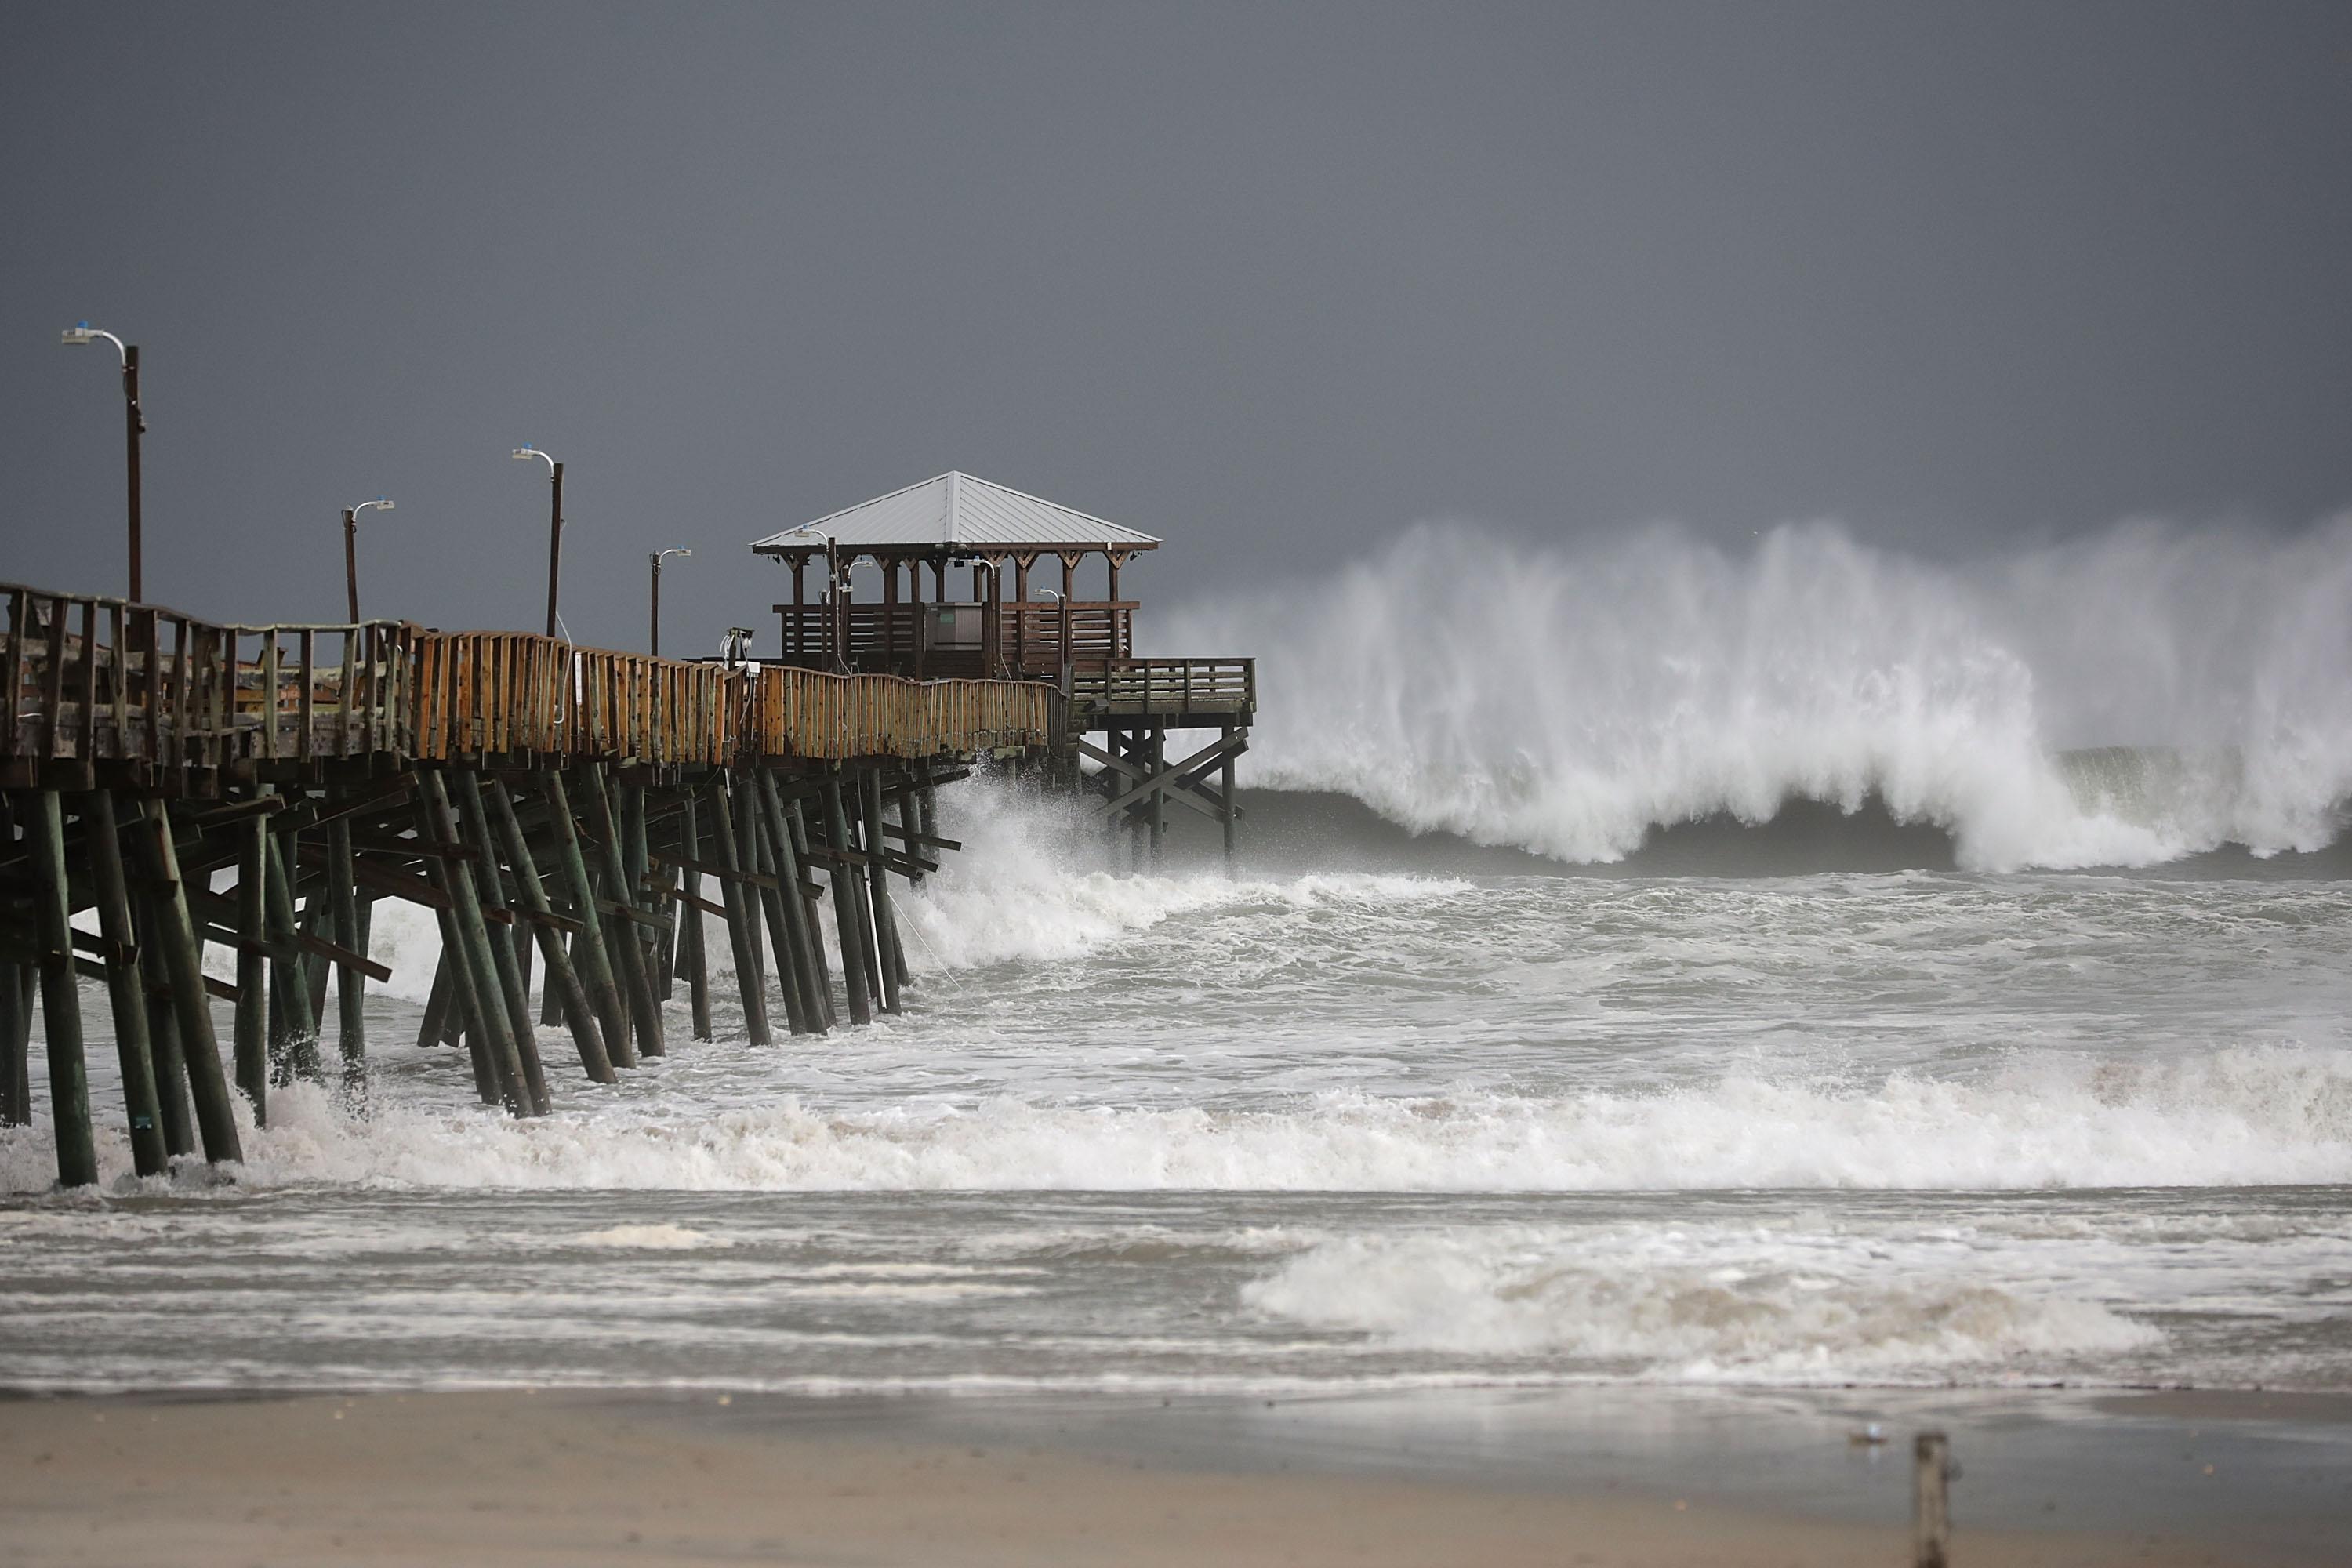 High waves crash around a pier in front of a gray, stormy sky.